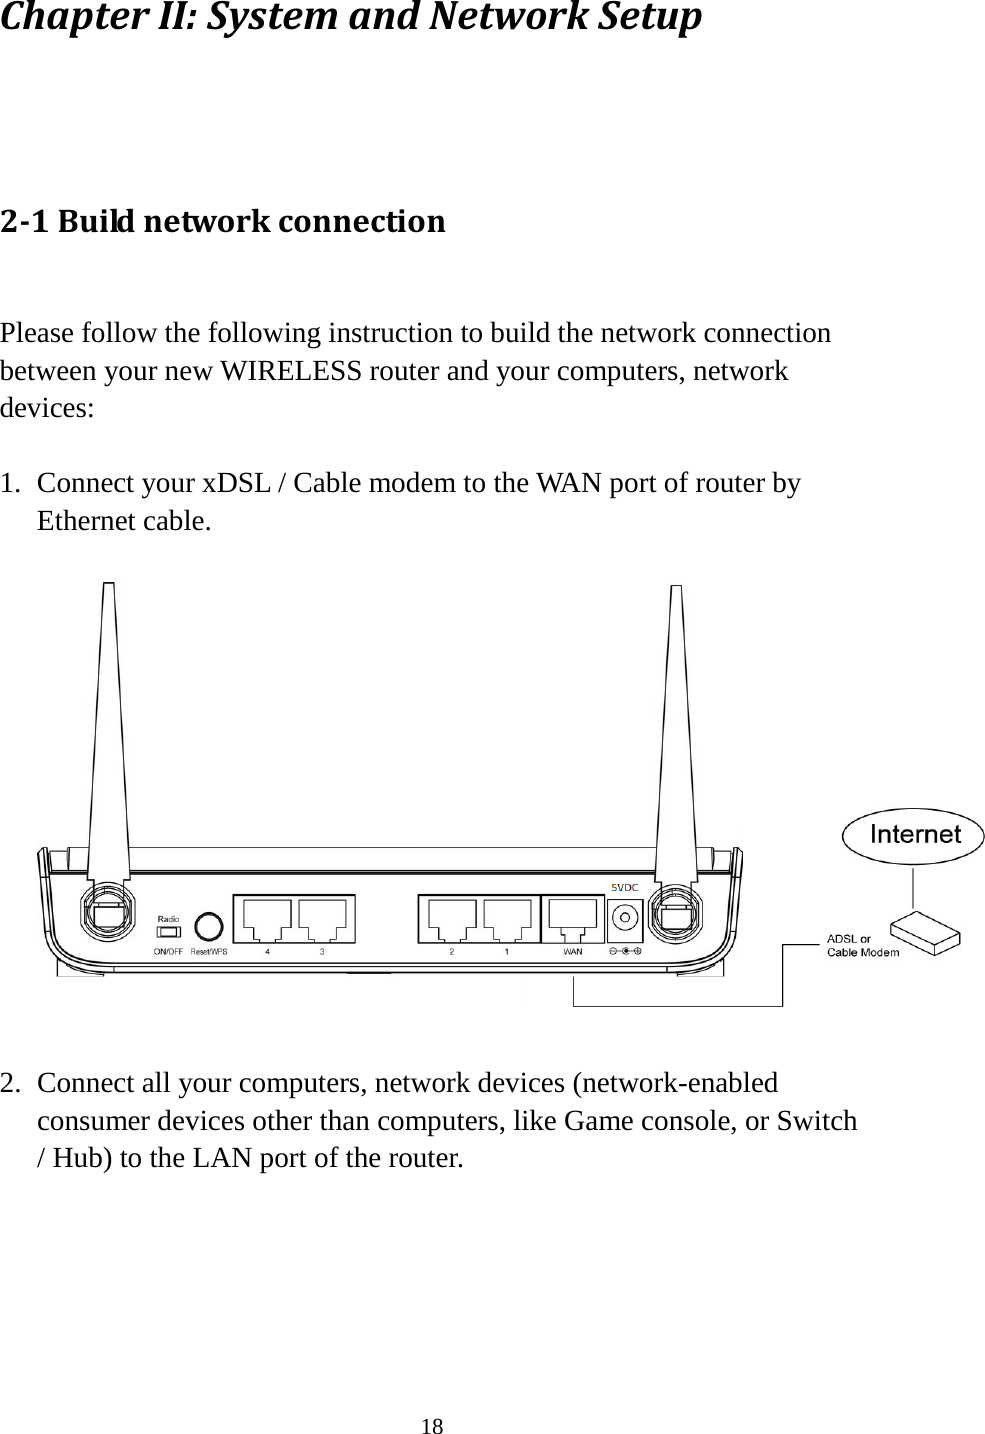 18 Chapter II: System and Network Setup  2-1 Build network connection  Please follow the following instruction to build the network connection between your new WIRELESS router and your computers, network devices:  1. Connect your xDSL / Cable modem to the WAN port of router by Ethernet cable.    2. Connect all your computers, network devices (network-enabled consumer devices other than computers, like Game console, or Switch / Hub) to the LAN port of the router.   